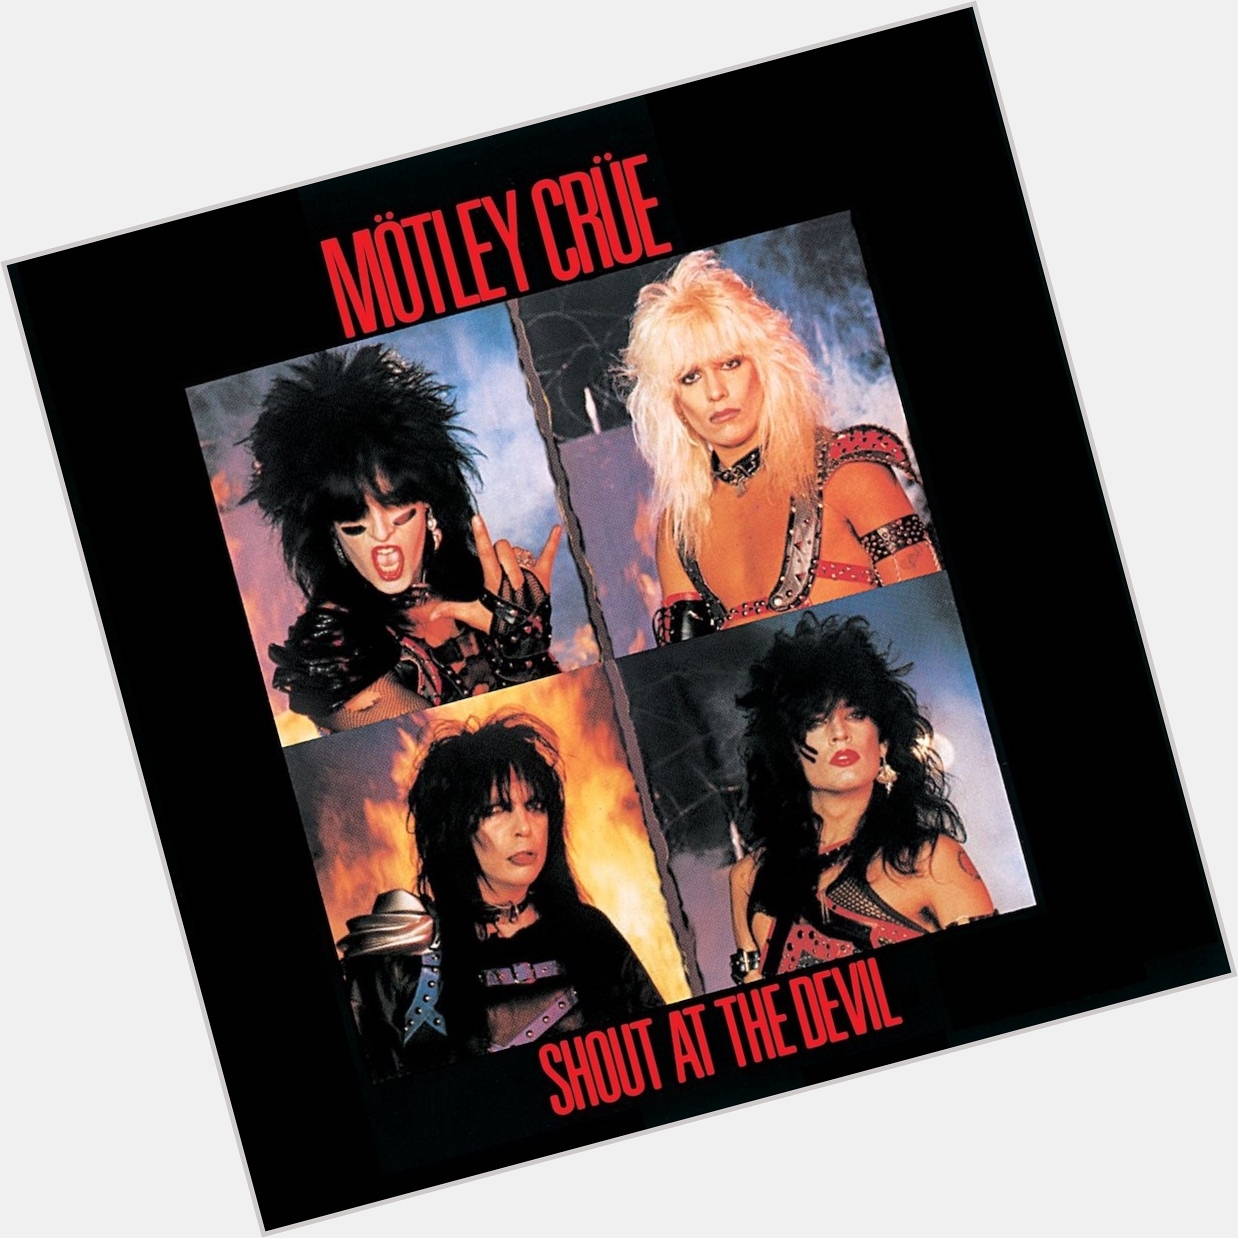 Happy birthday to Vince Neil, who turns 61 today! What\s your favorite Motley album? 